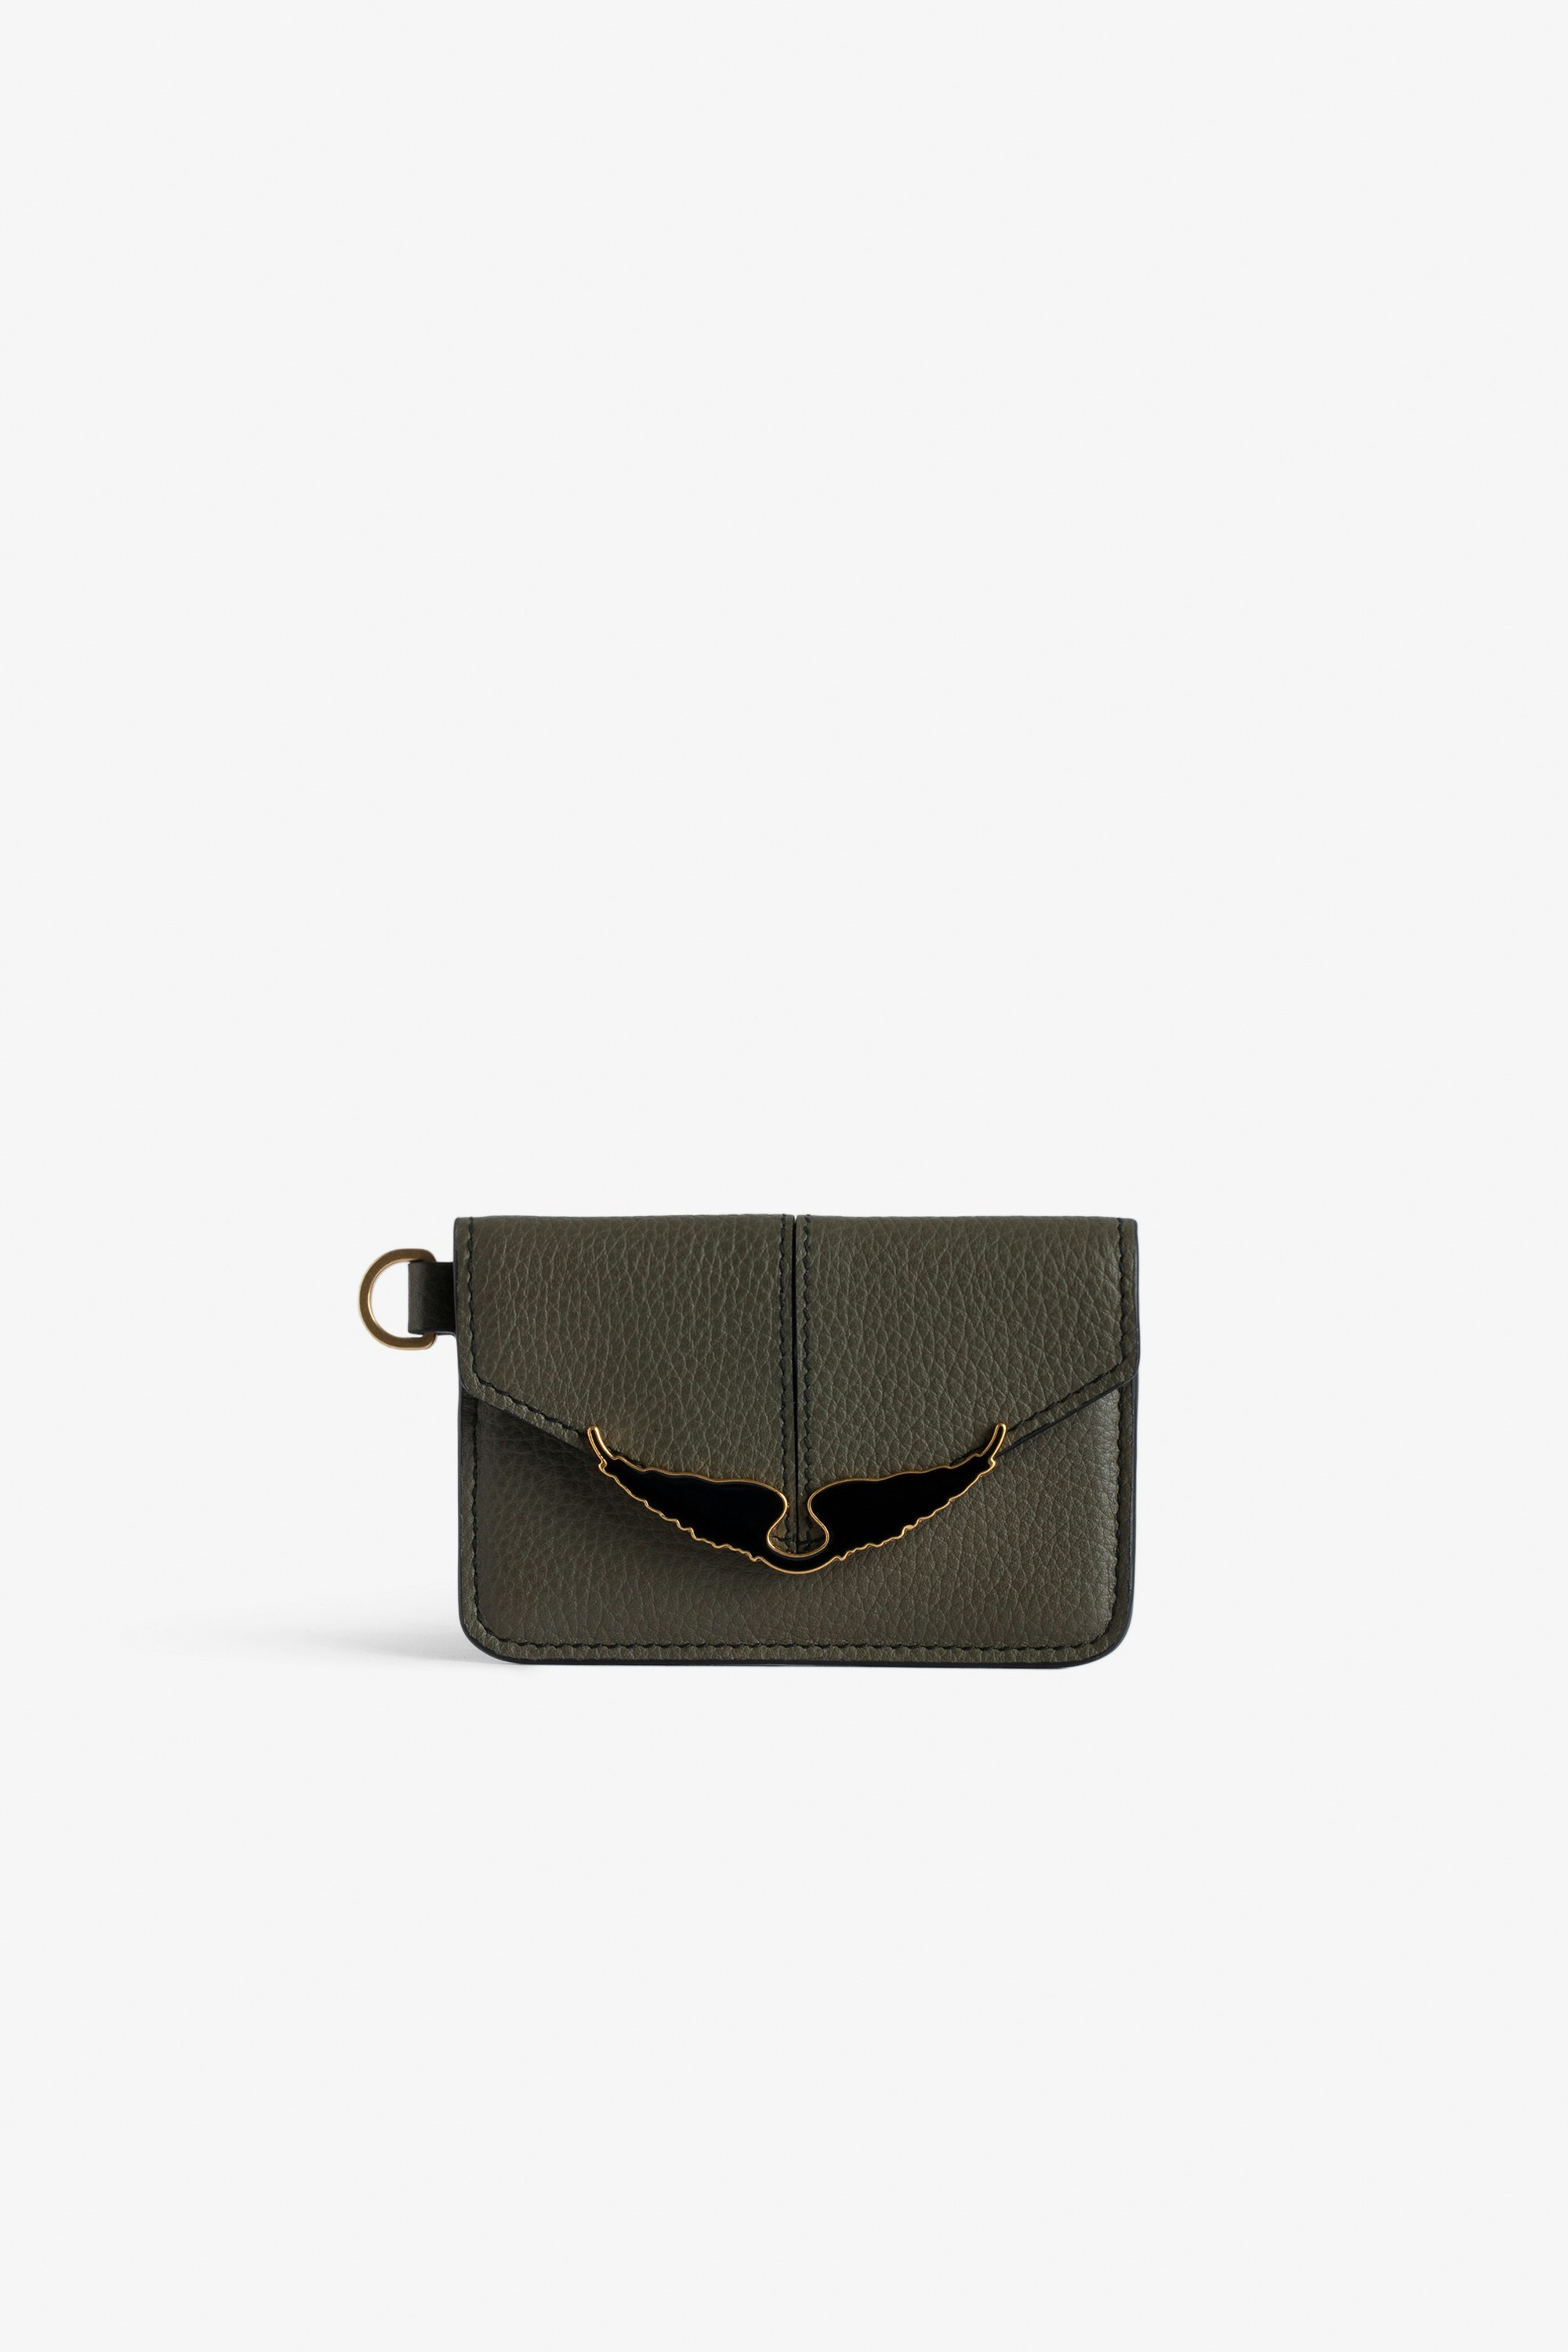 Borderline Pass Card Case Women’s khaki grained patent leather envelope card holder with wings charm.